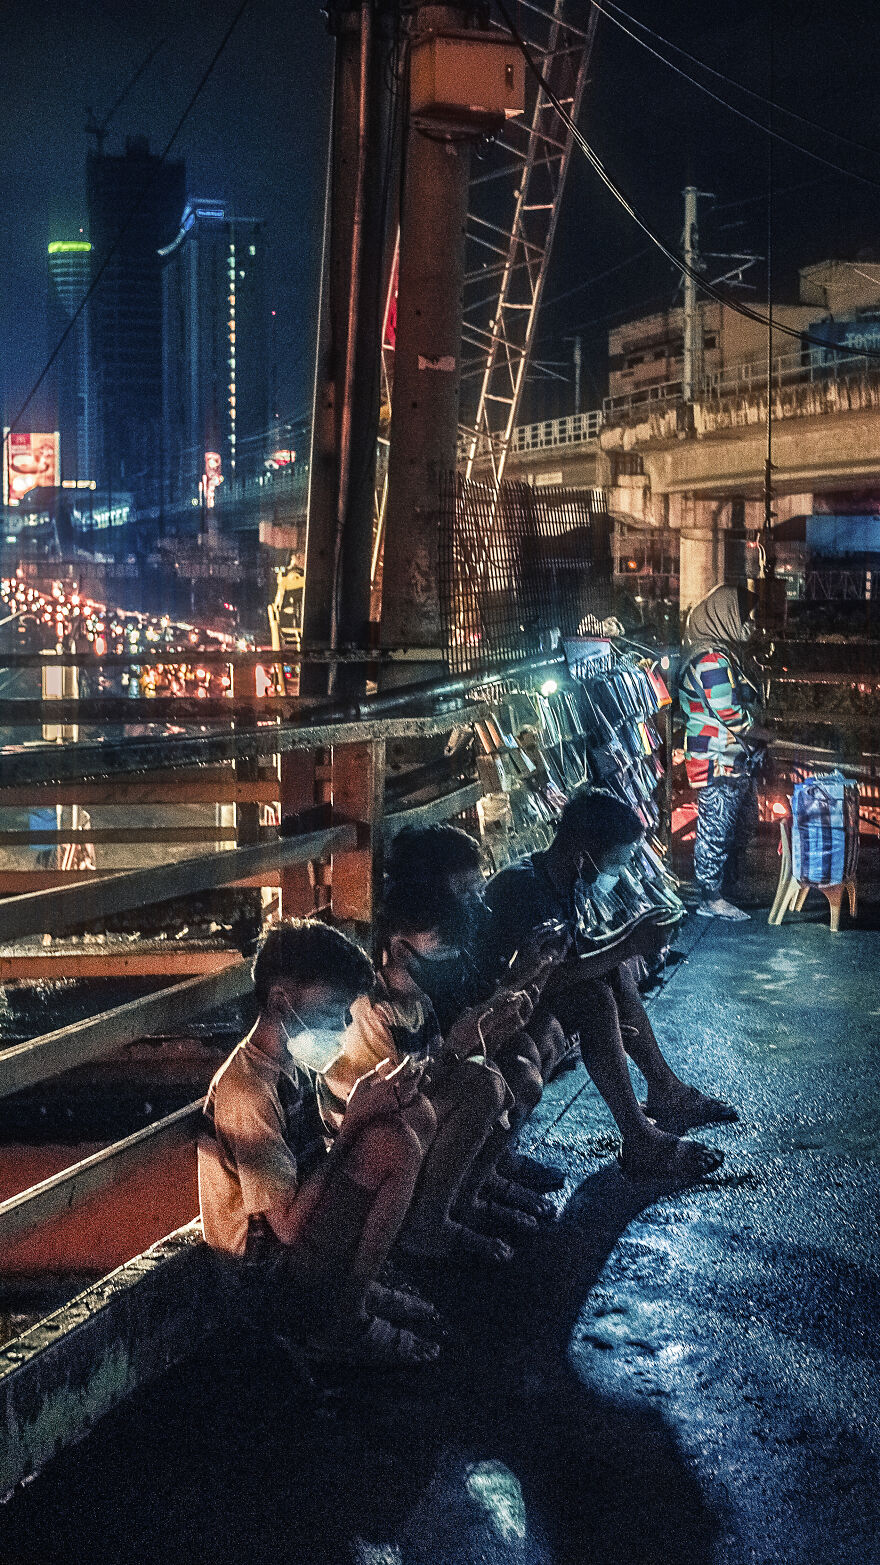 When I Say That My Photography Is Cyberpunk, I Really Mean It In The Truest Meaning Of The Genre. I Make Sure To Include Elements Of High-Tech. Here Are Kids Jacked Wirelessly Into Cyberspace At A Busy Overpass During Rush Hour